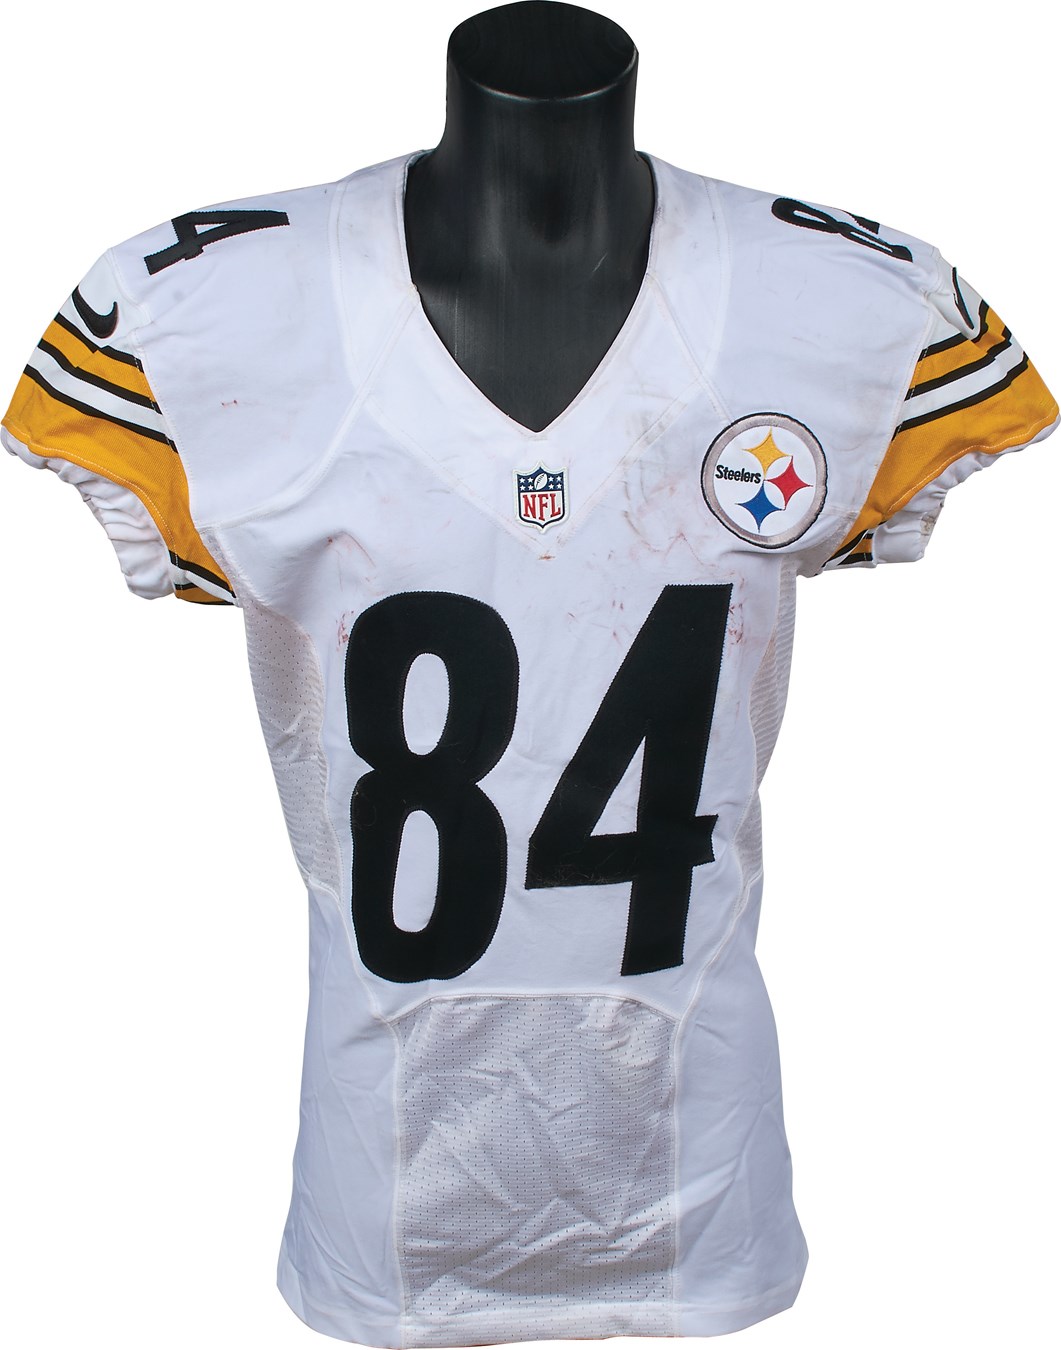 September 11, 2014 Antonio Brown Pittsburgh Steelers Signed Game Worn Jersey (Photo-Match)